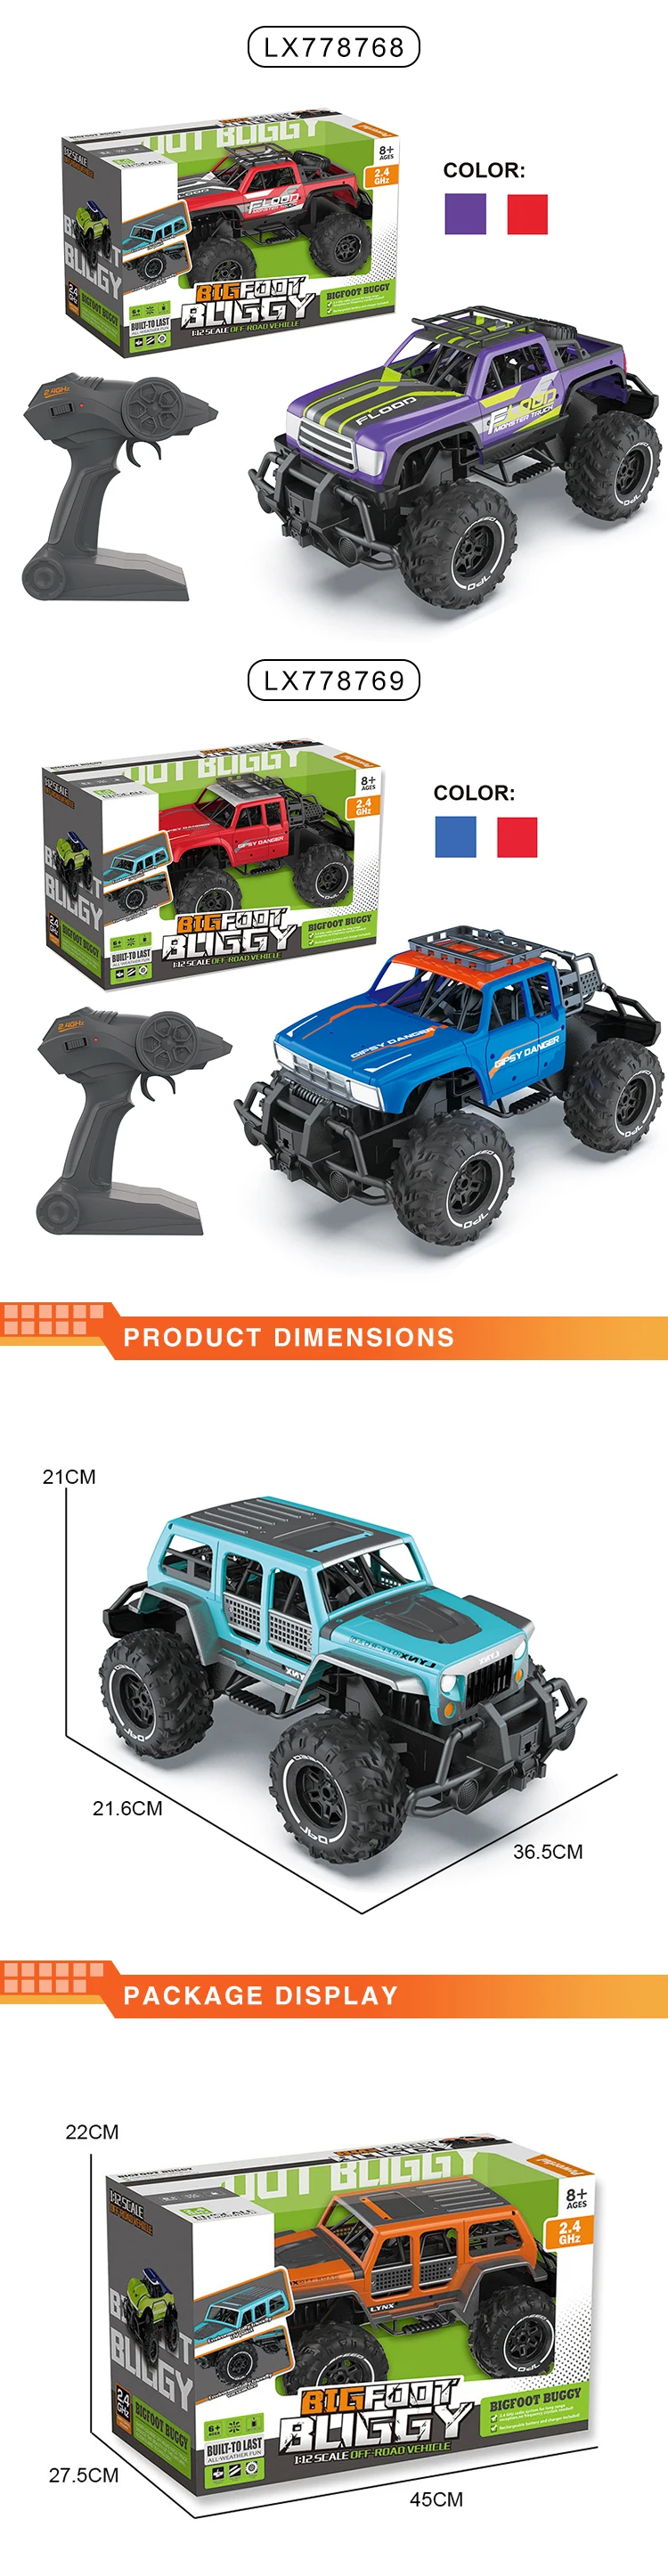 Amazon Hot Sale Climbing Crazy Car Crawler RC Offroad Buggy High Speed Electric Car Toy